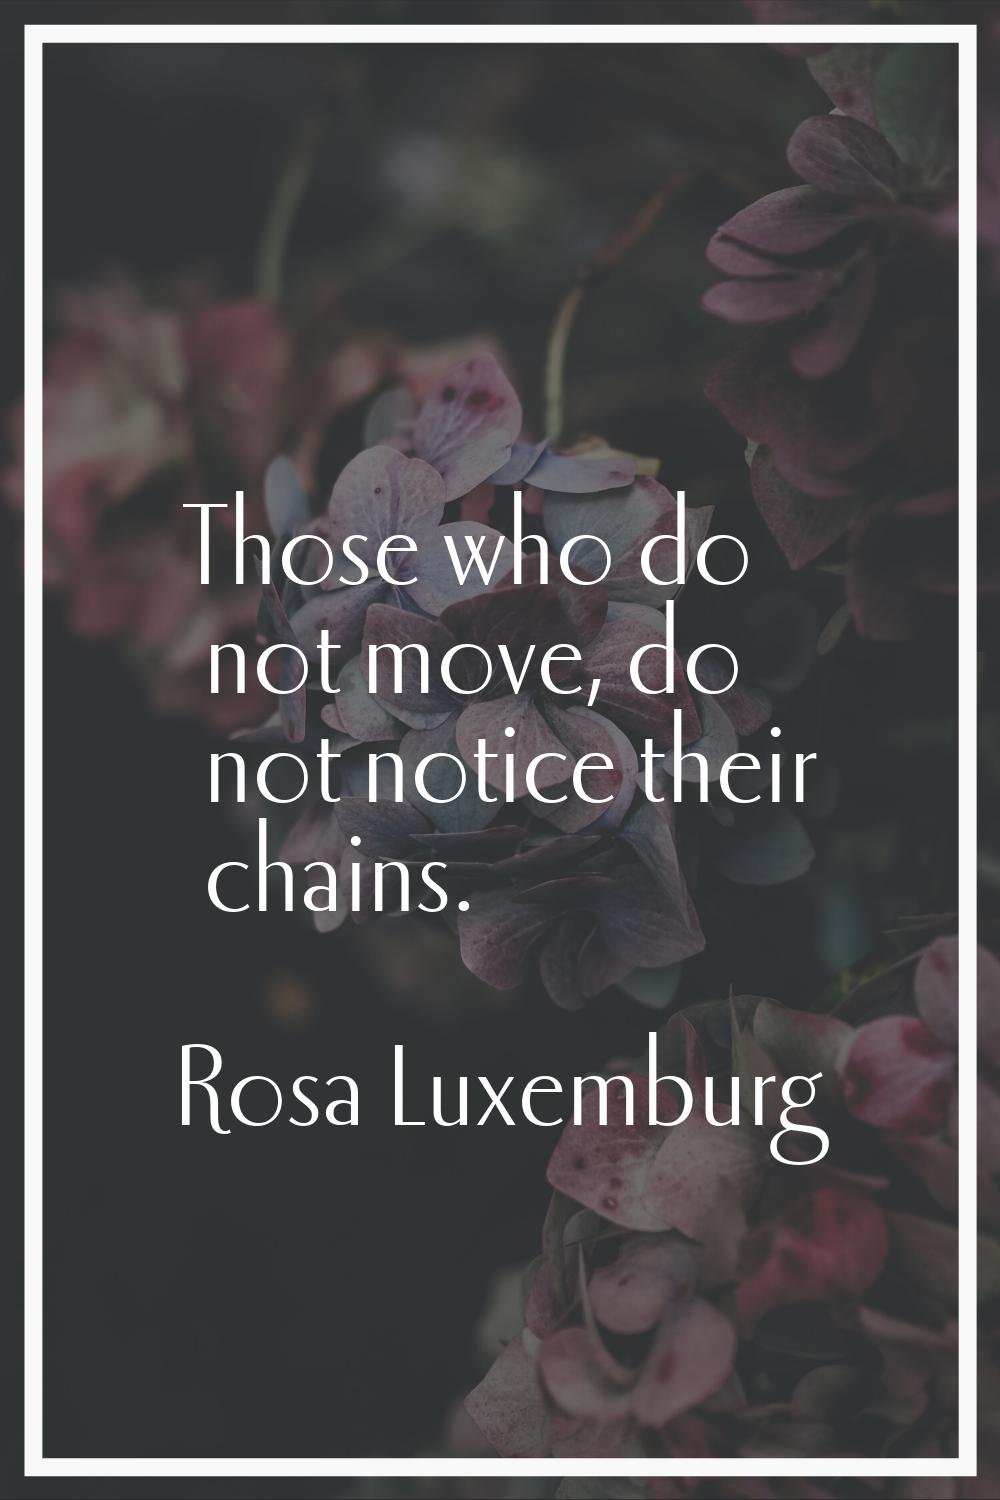 Those who do not move, do not notice their chains.